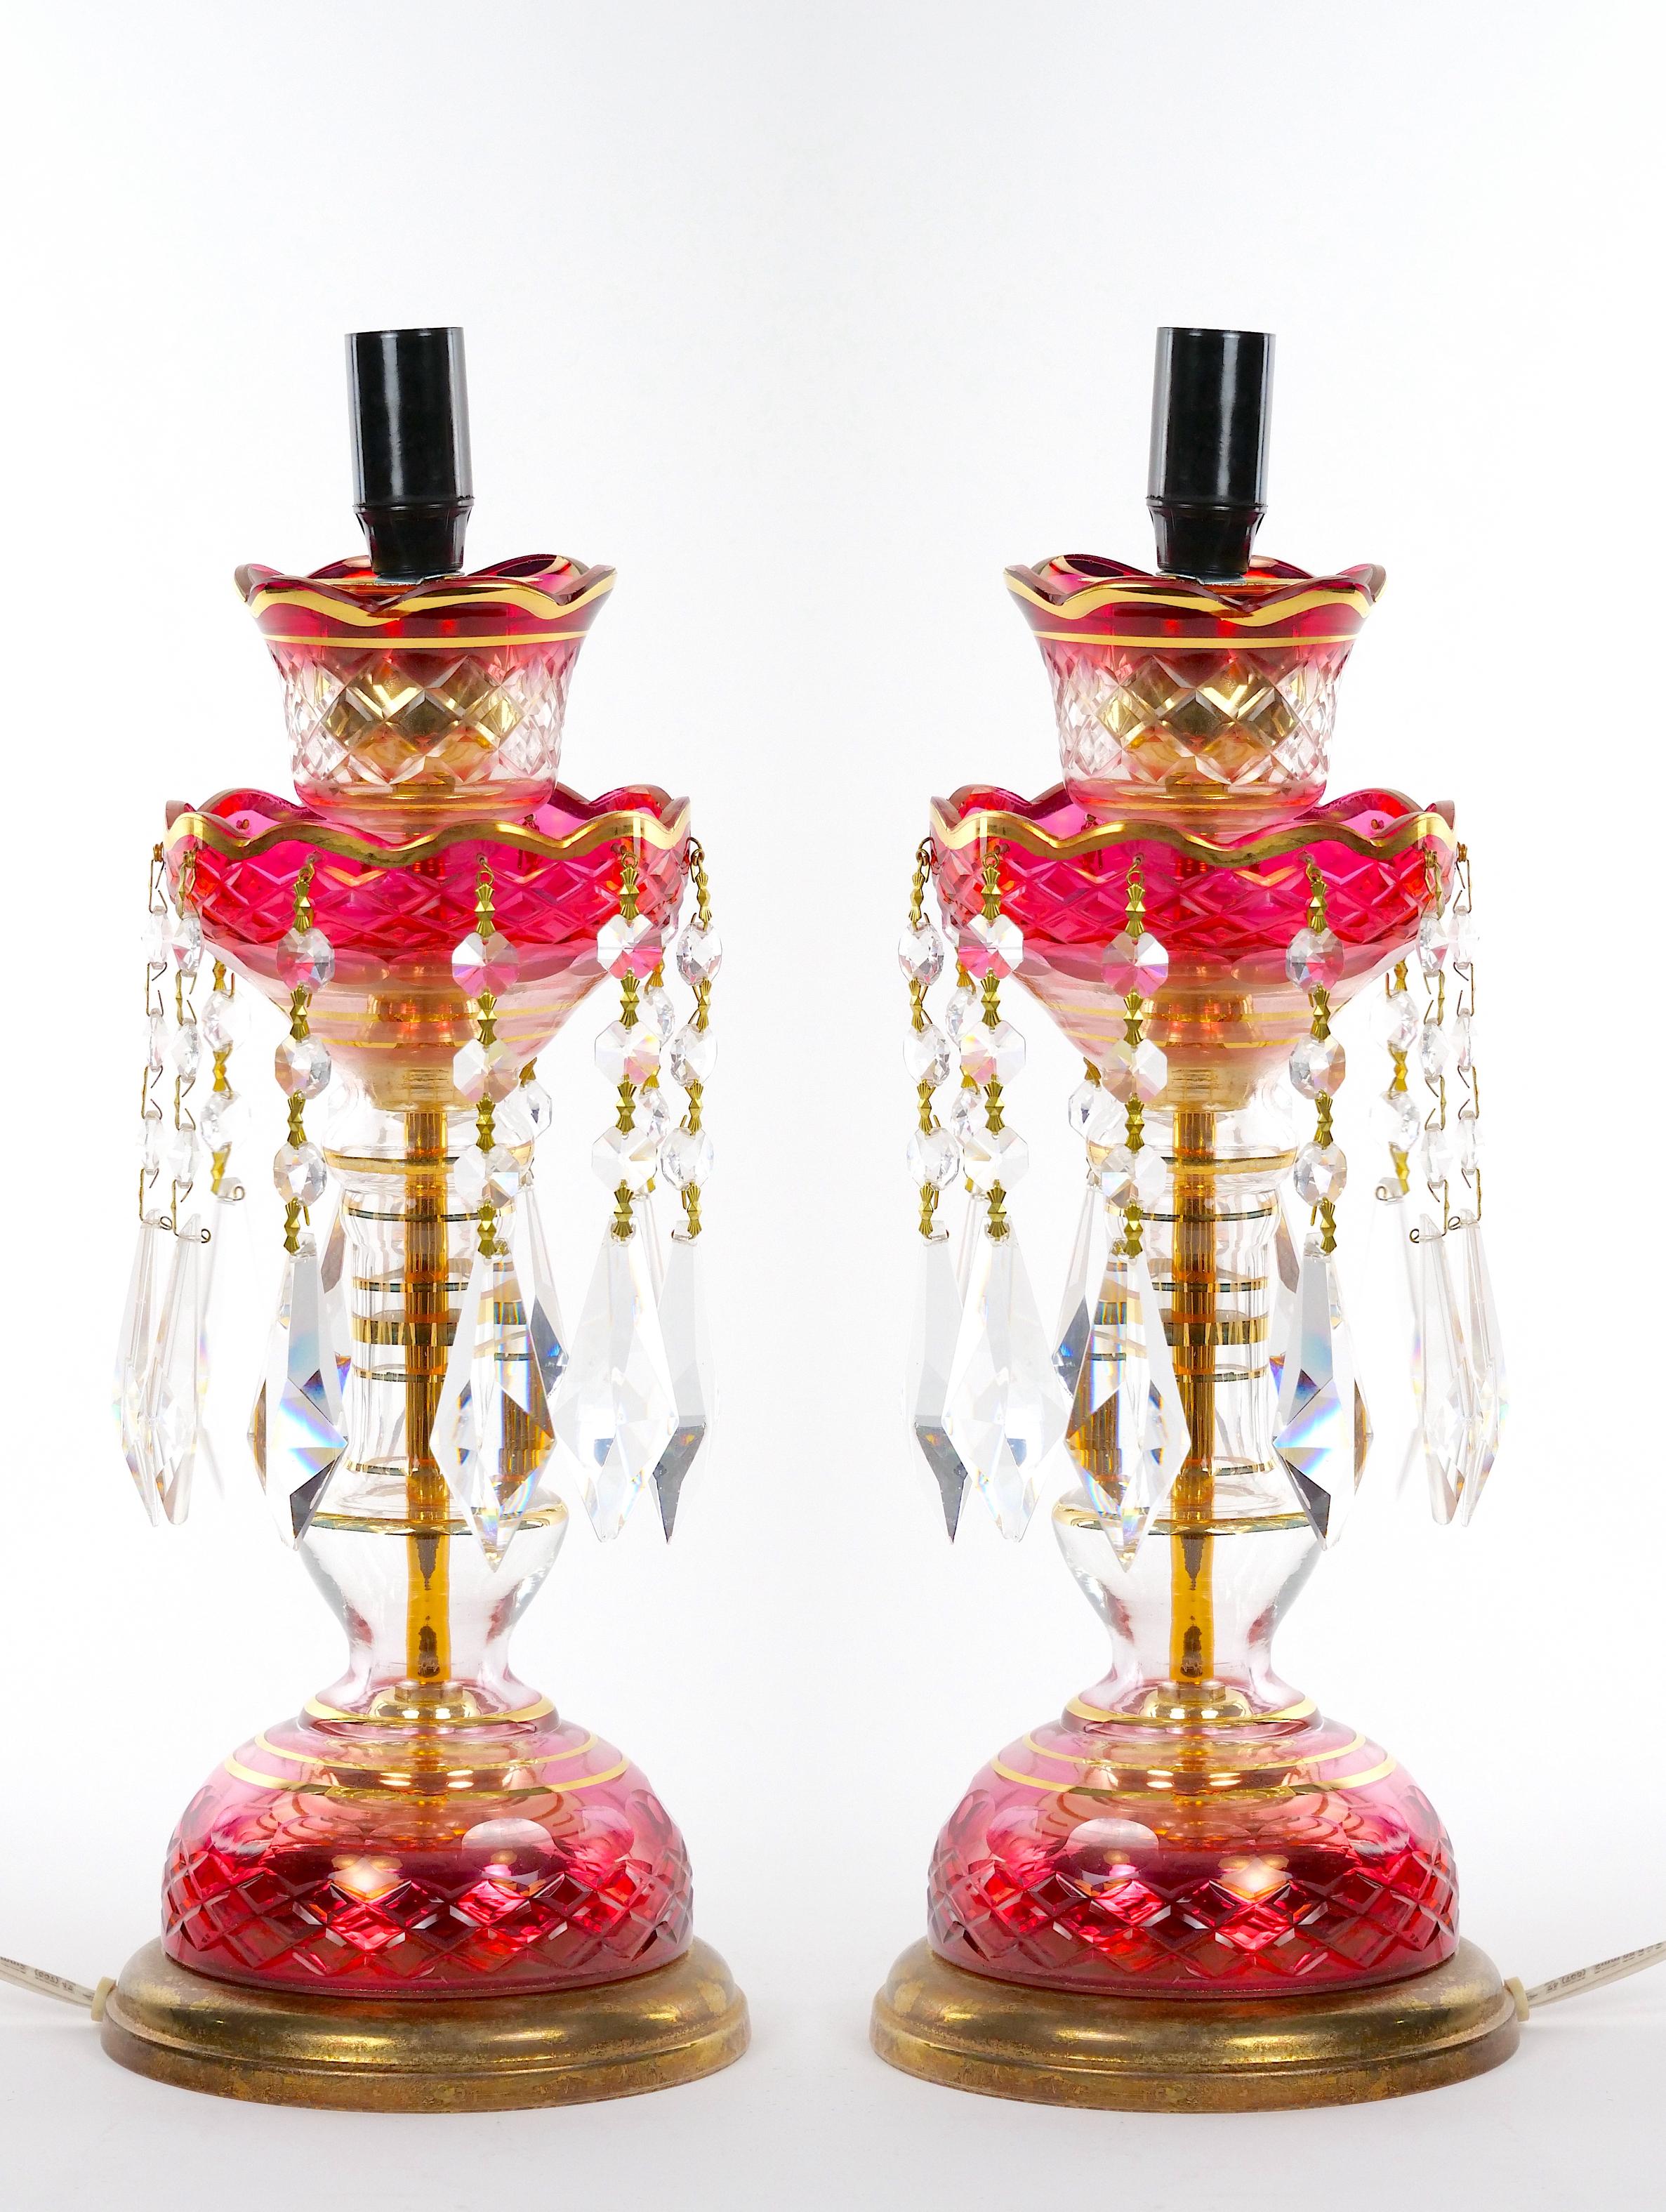 Beautiful pair of antique 19th century glass lusters (candlesticks) modified for use as table lamps with their original cranberry red-to-clear cut glass hurricane-form shades with elongated starburst and cross-hatch motifs, gilt metal standards with